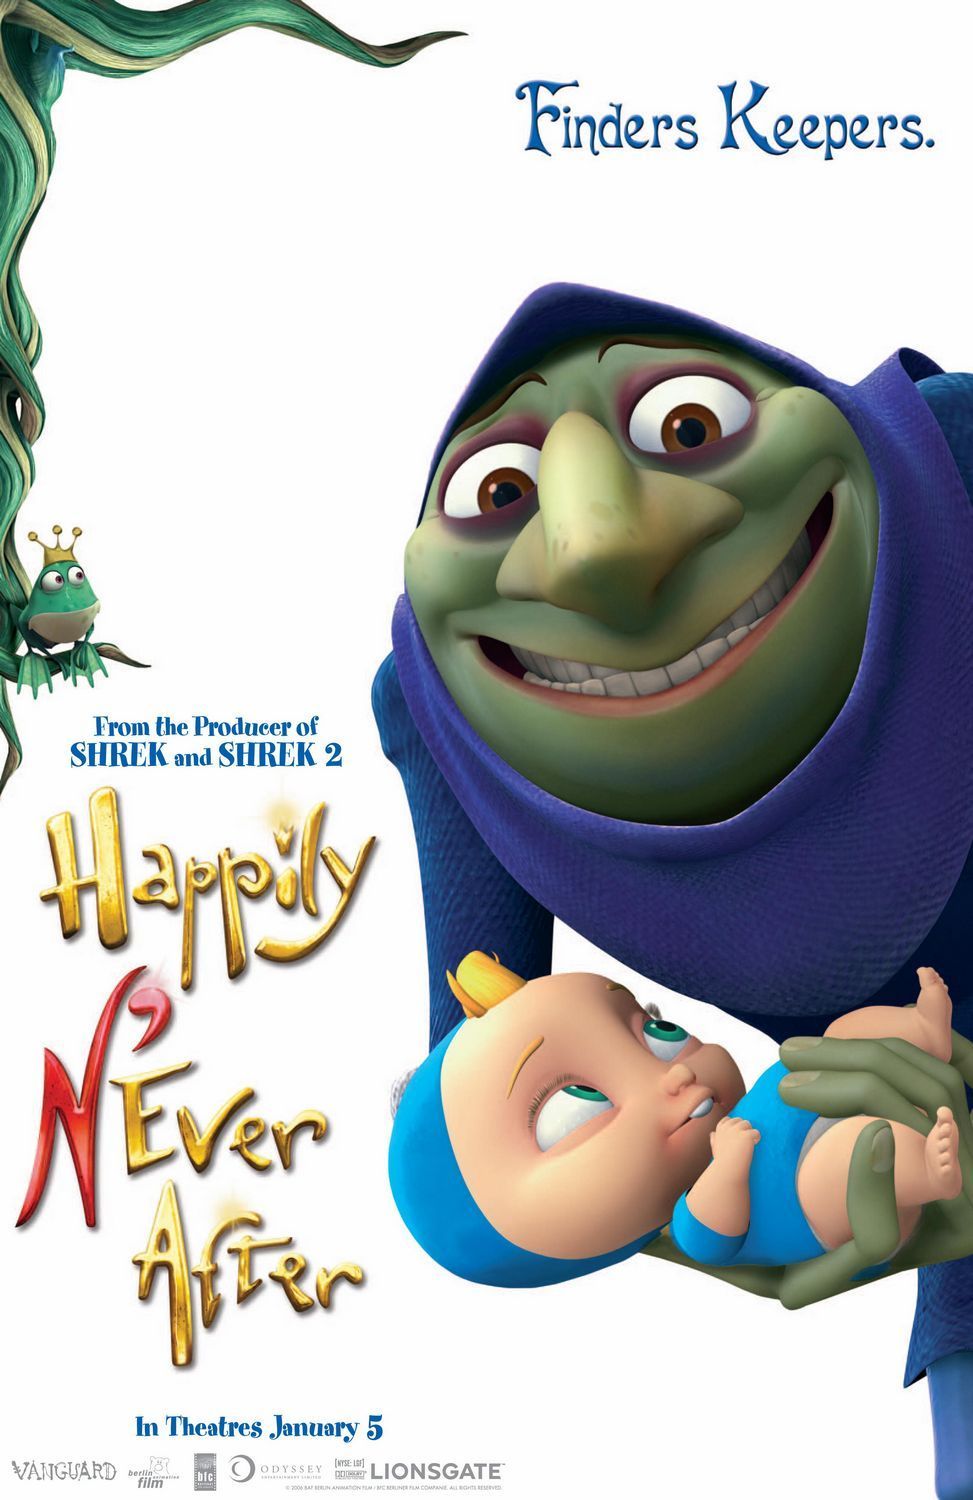 Happily-N-ever-After-posters-happily-never-after-9571287-973-1500.jpg